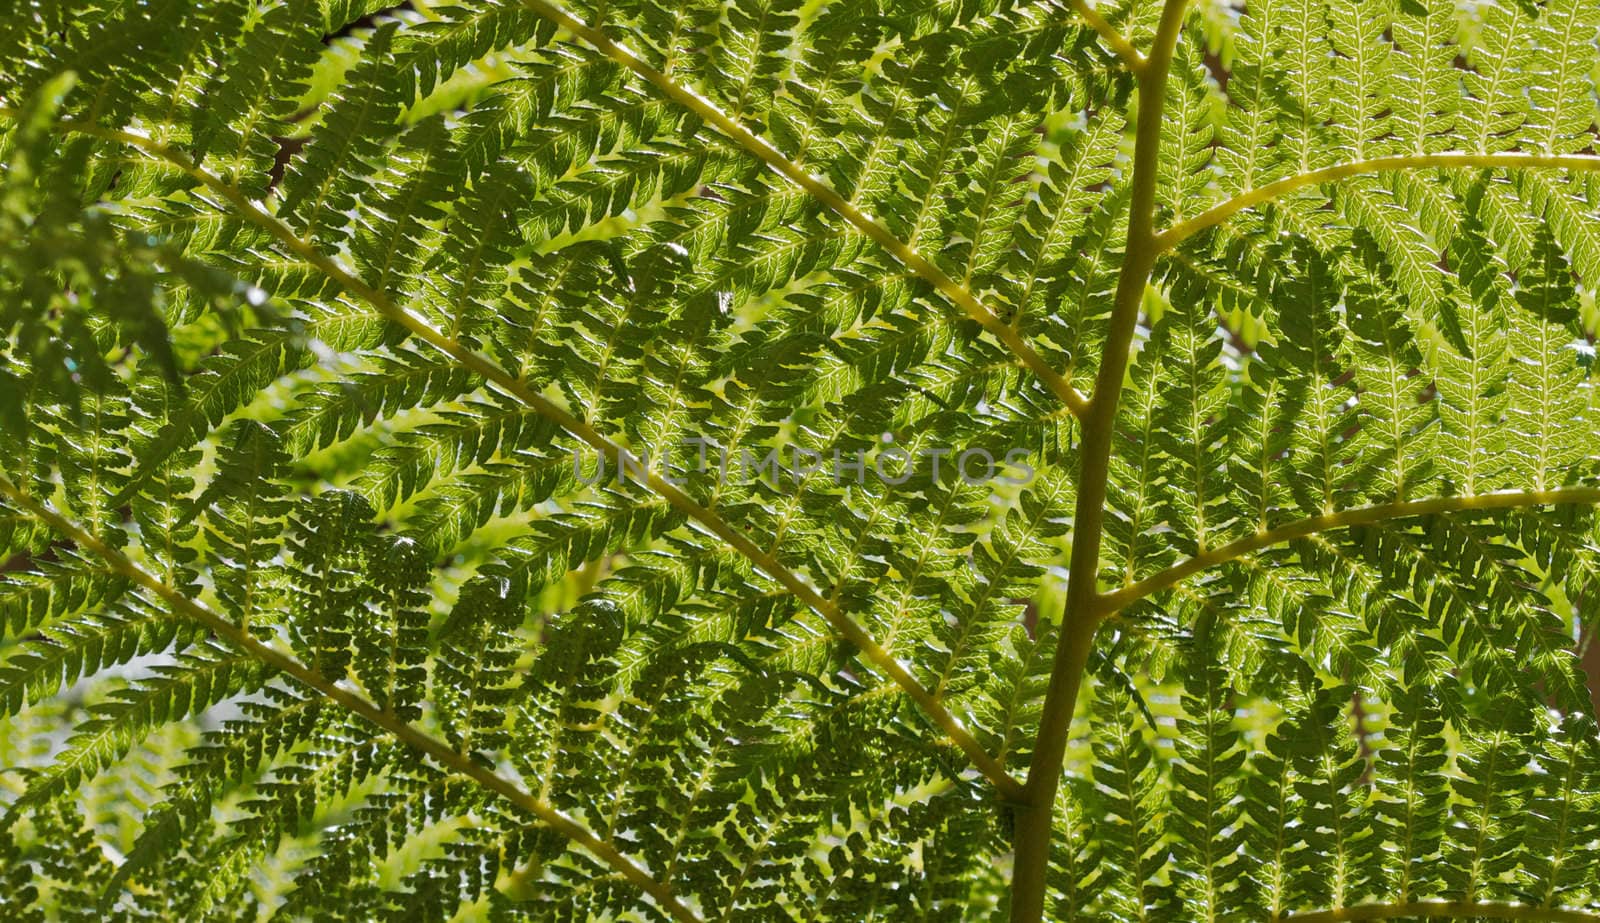 The underside of a fern branch sunlit from above